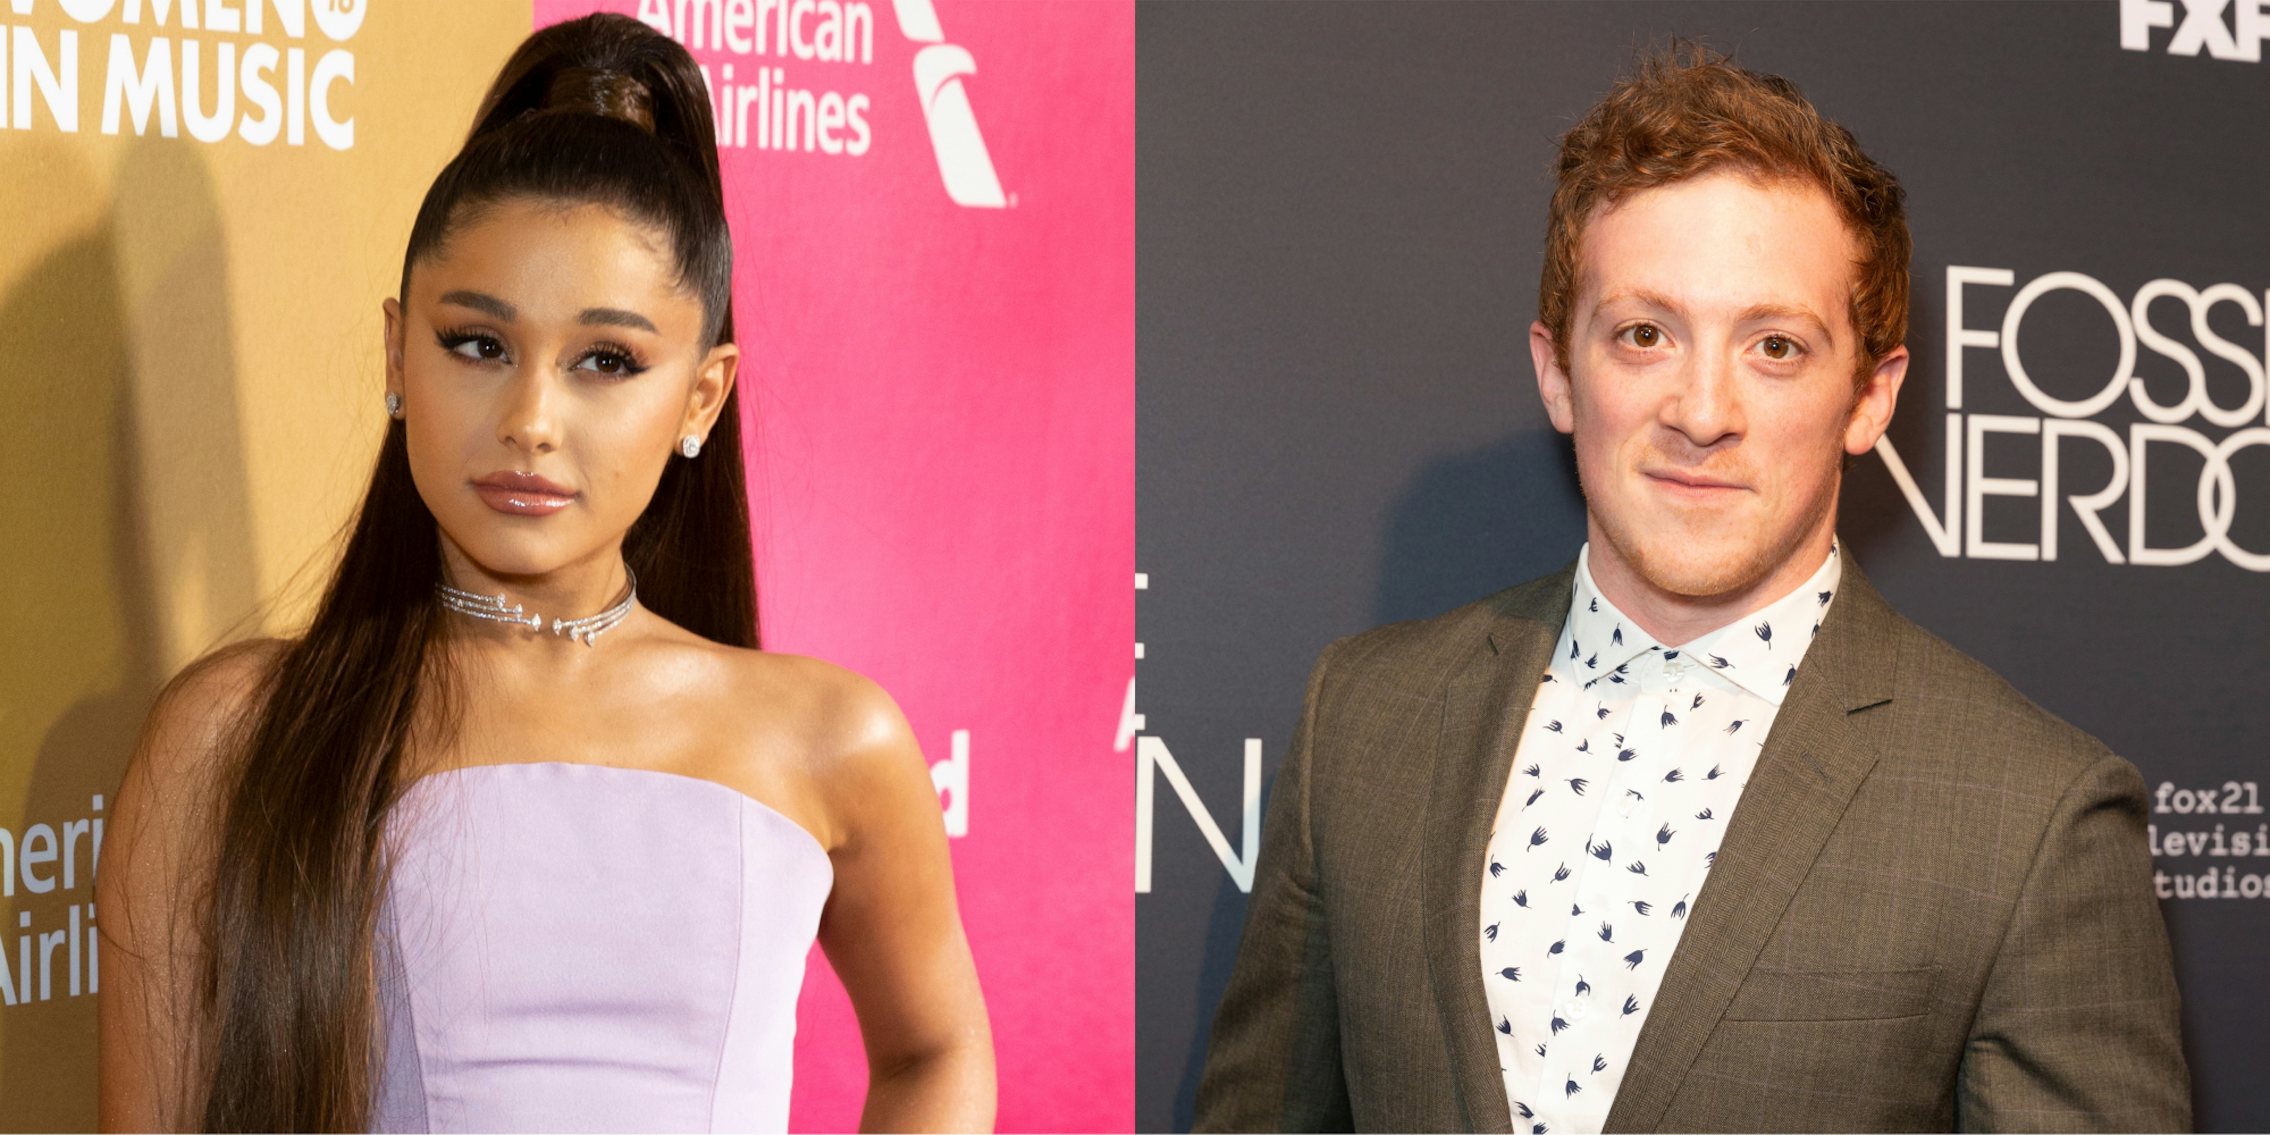 Ariana Grande in front of yellow and pink background (l) Ethan Slater in front of grey background (r)